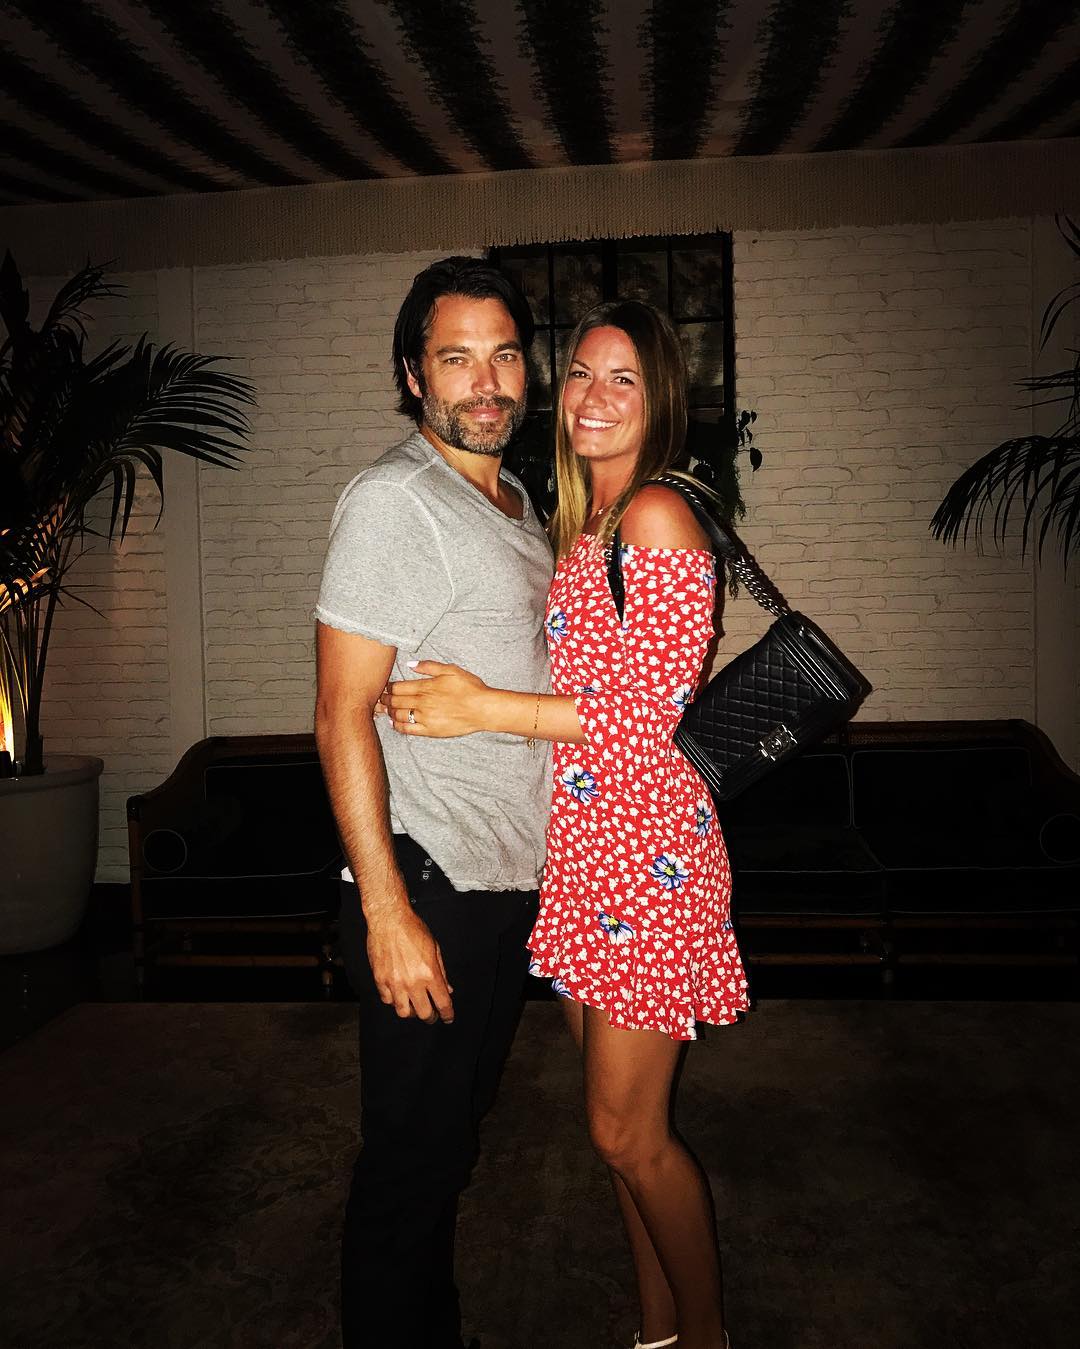 10 Interesting Facts About Tim Rozon’s Wife, Linzey Rozon That You Should Know